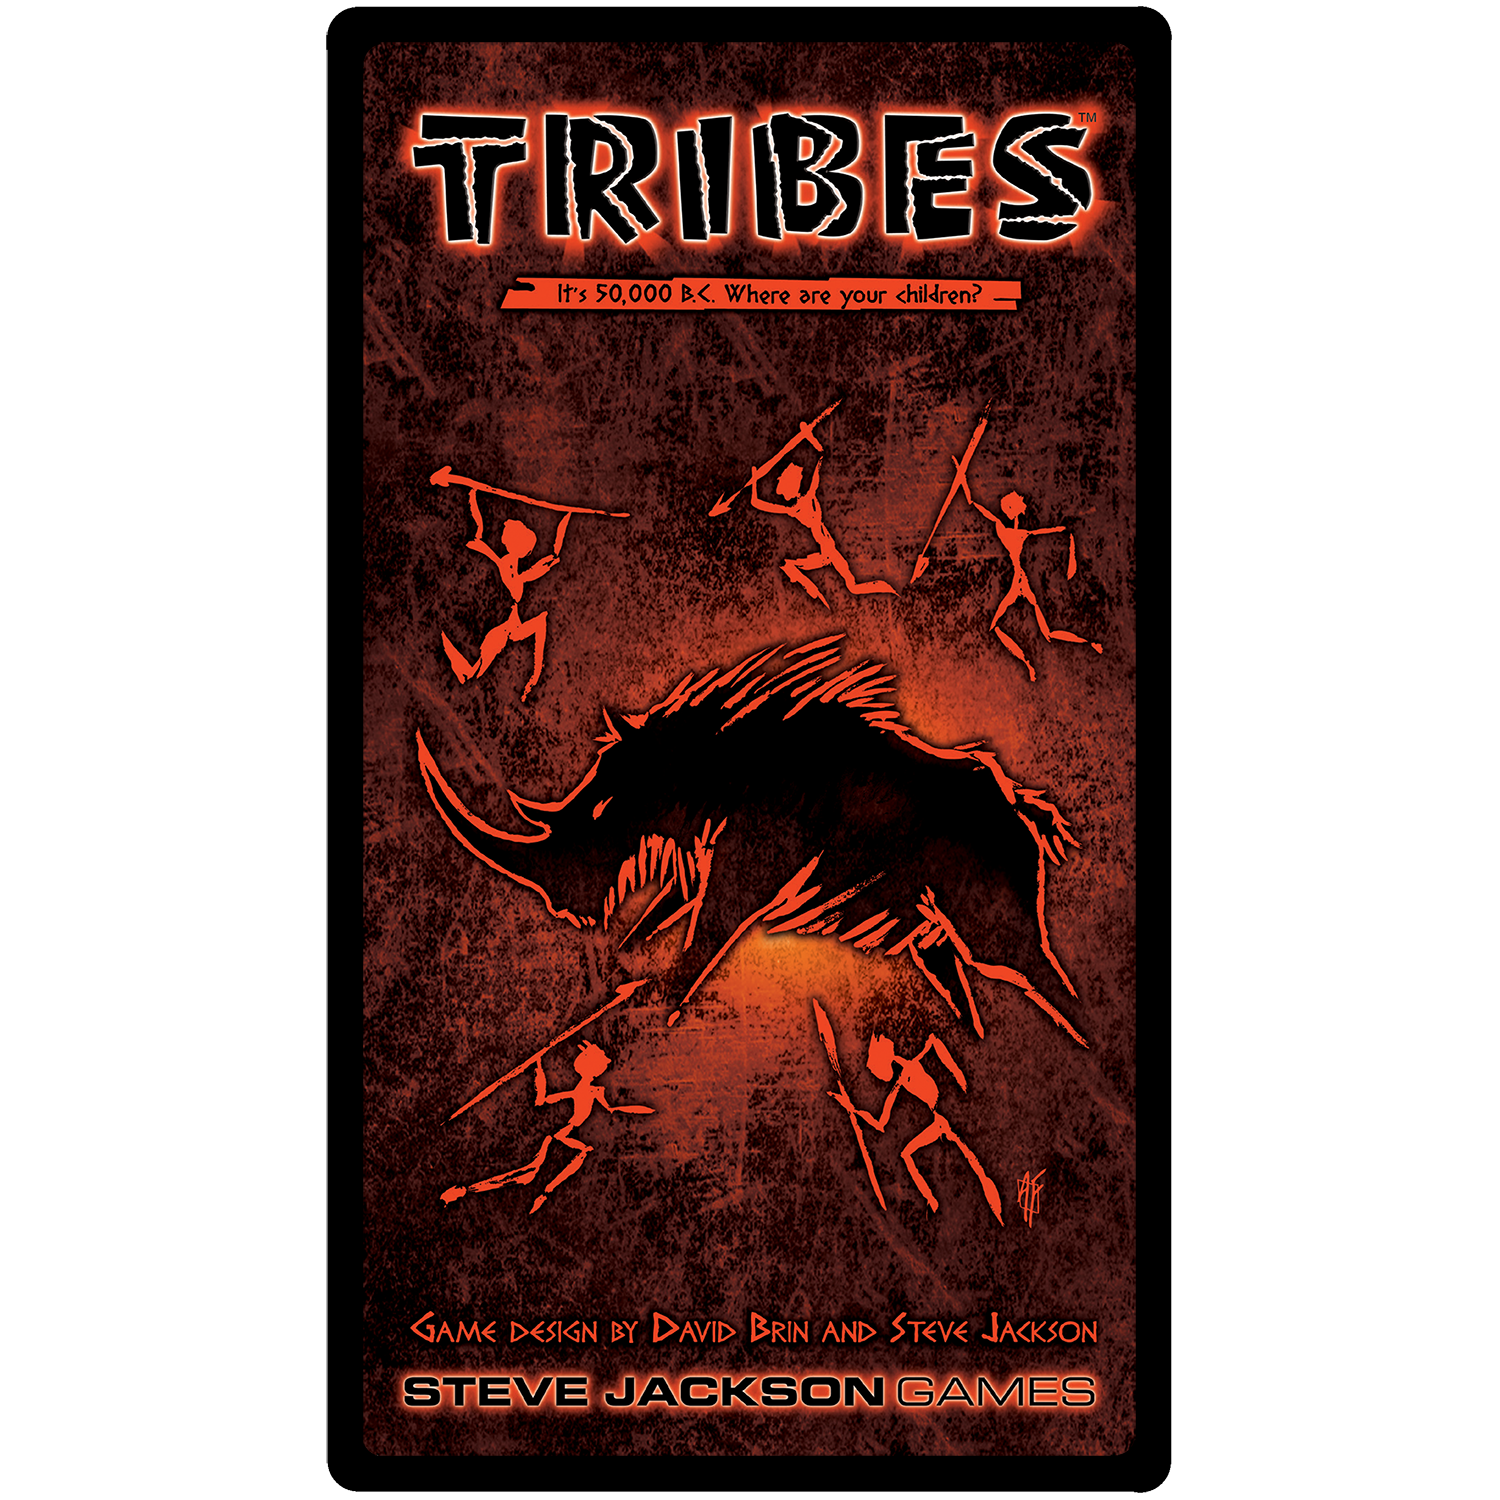 The cover of Tribes